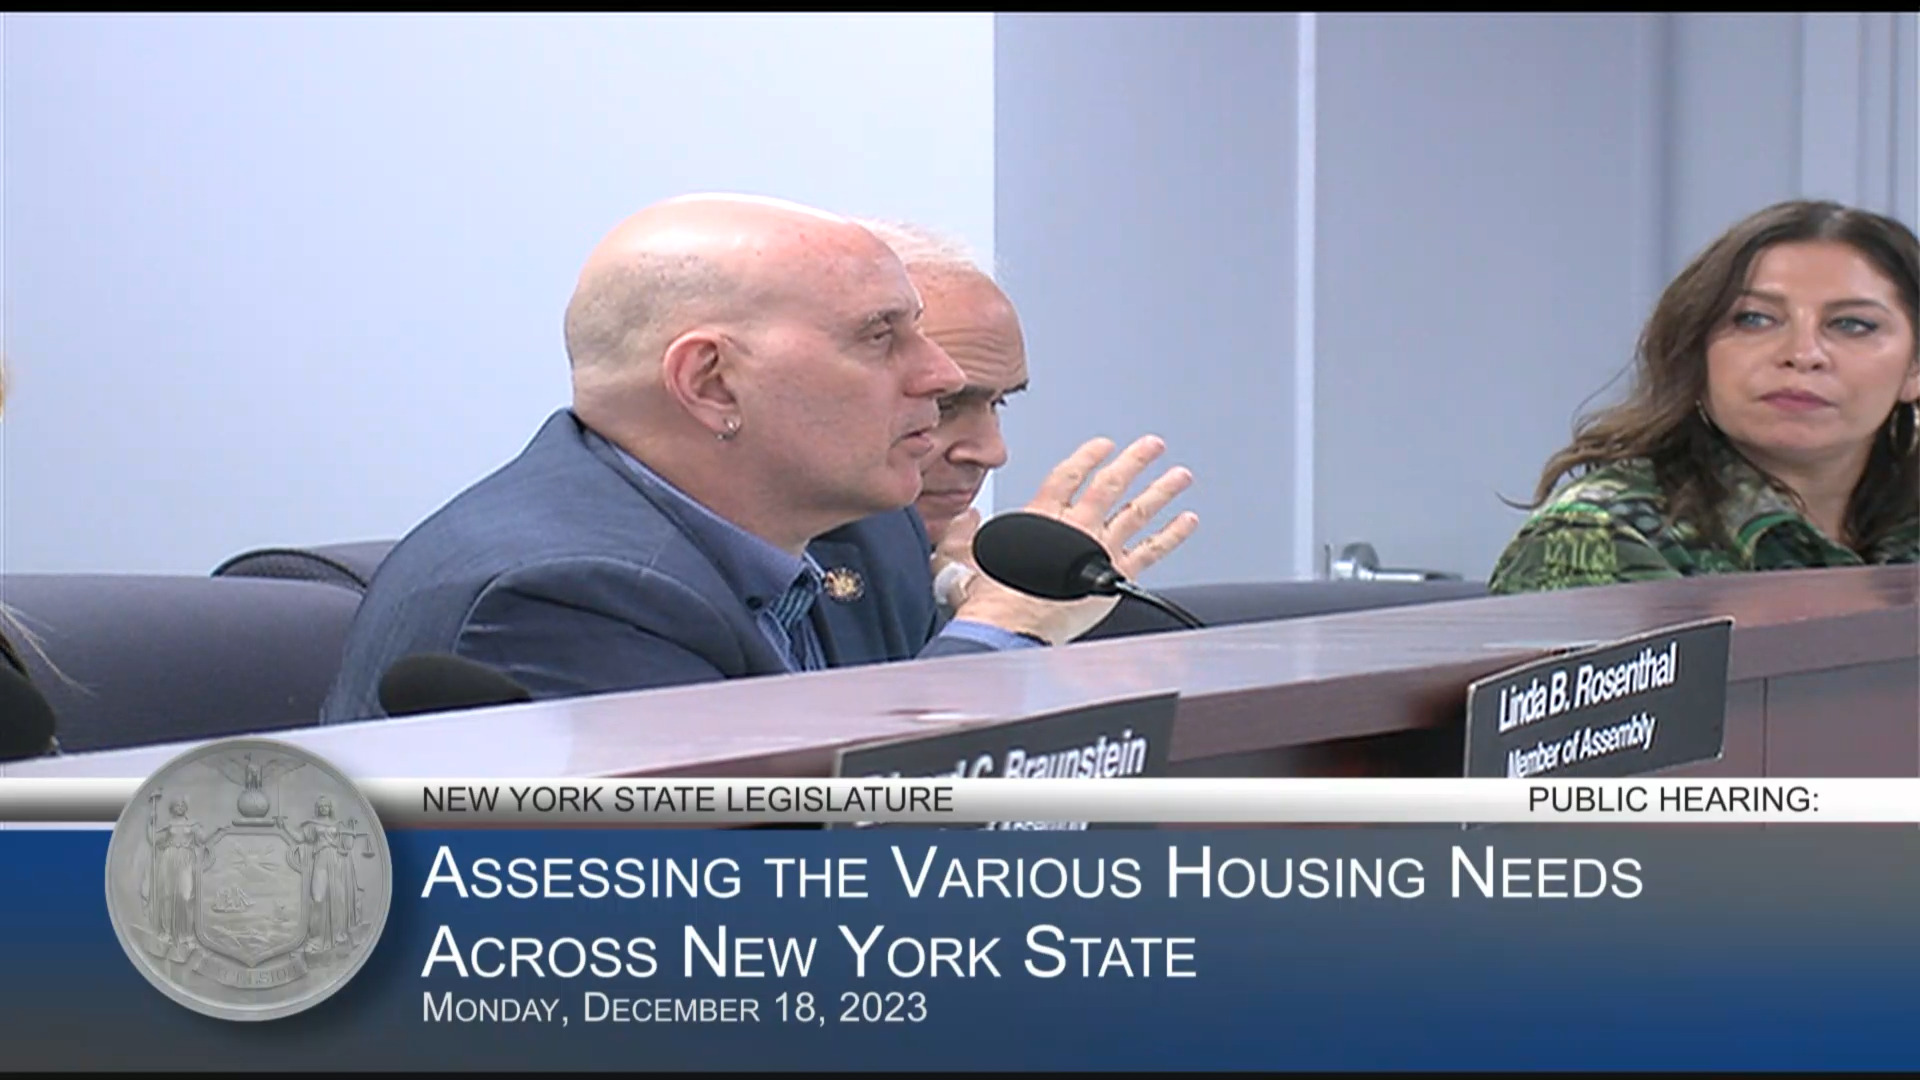 NYC District Council of Carpenters Representative Testifies During a Public Hearing to Assess the Various Housing Needs Across NYS